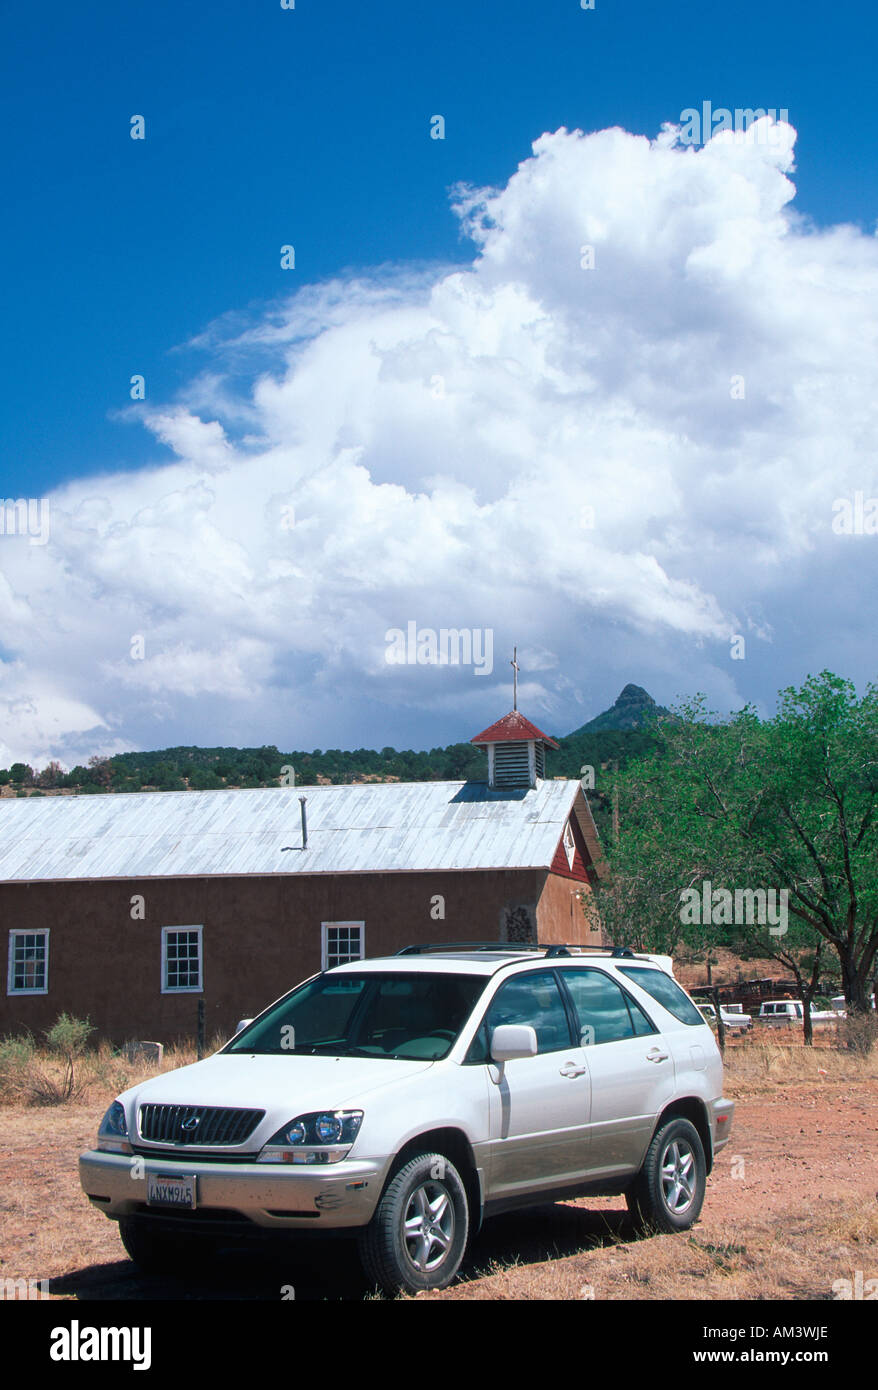 Joe Sohm stopping Lexus RX300 in front of old Church in New Mexico Stock Photo